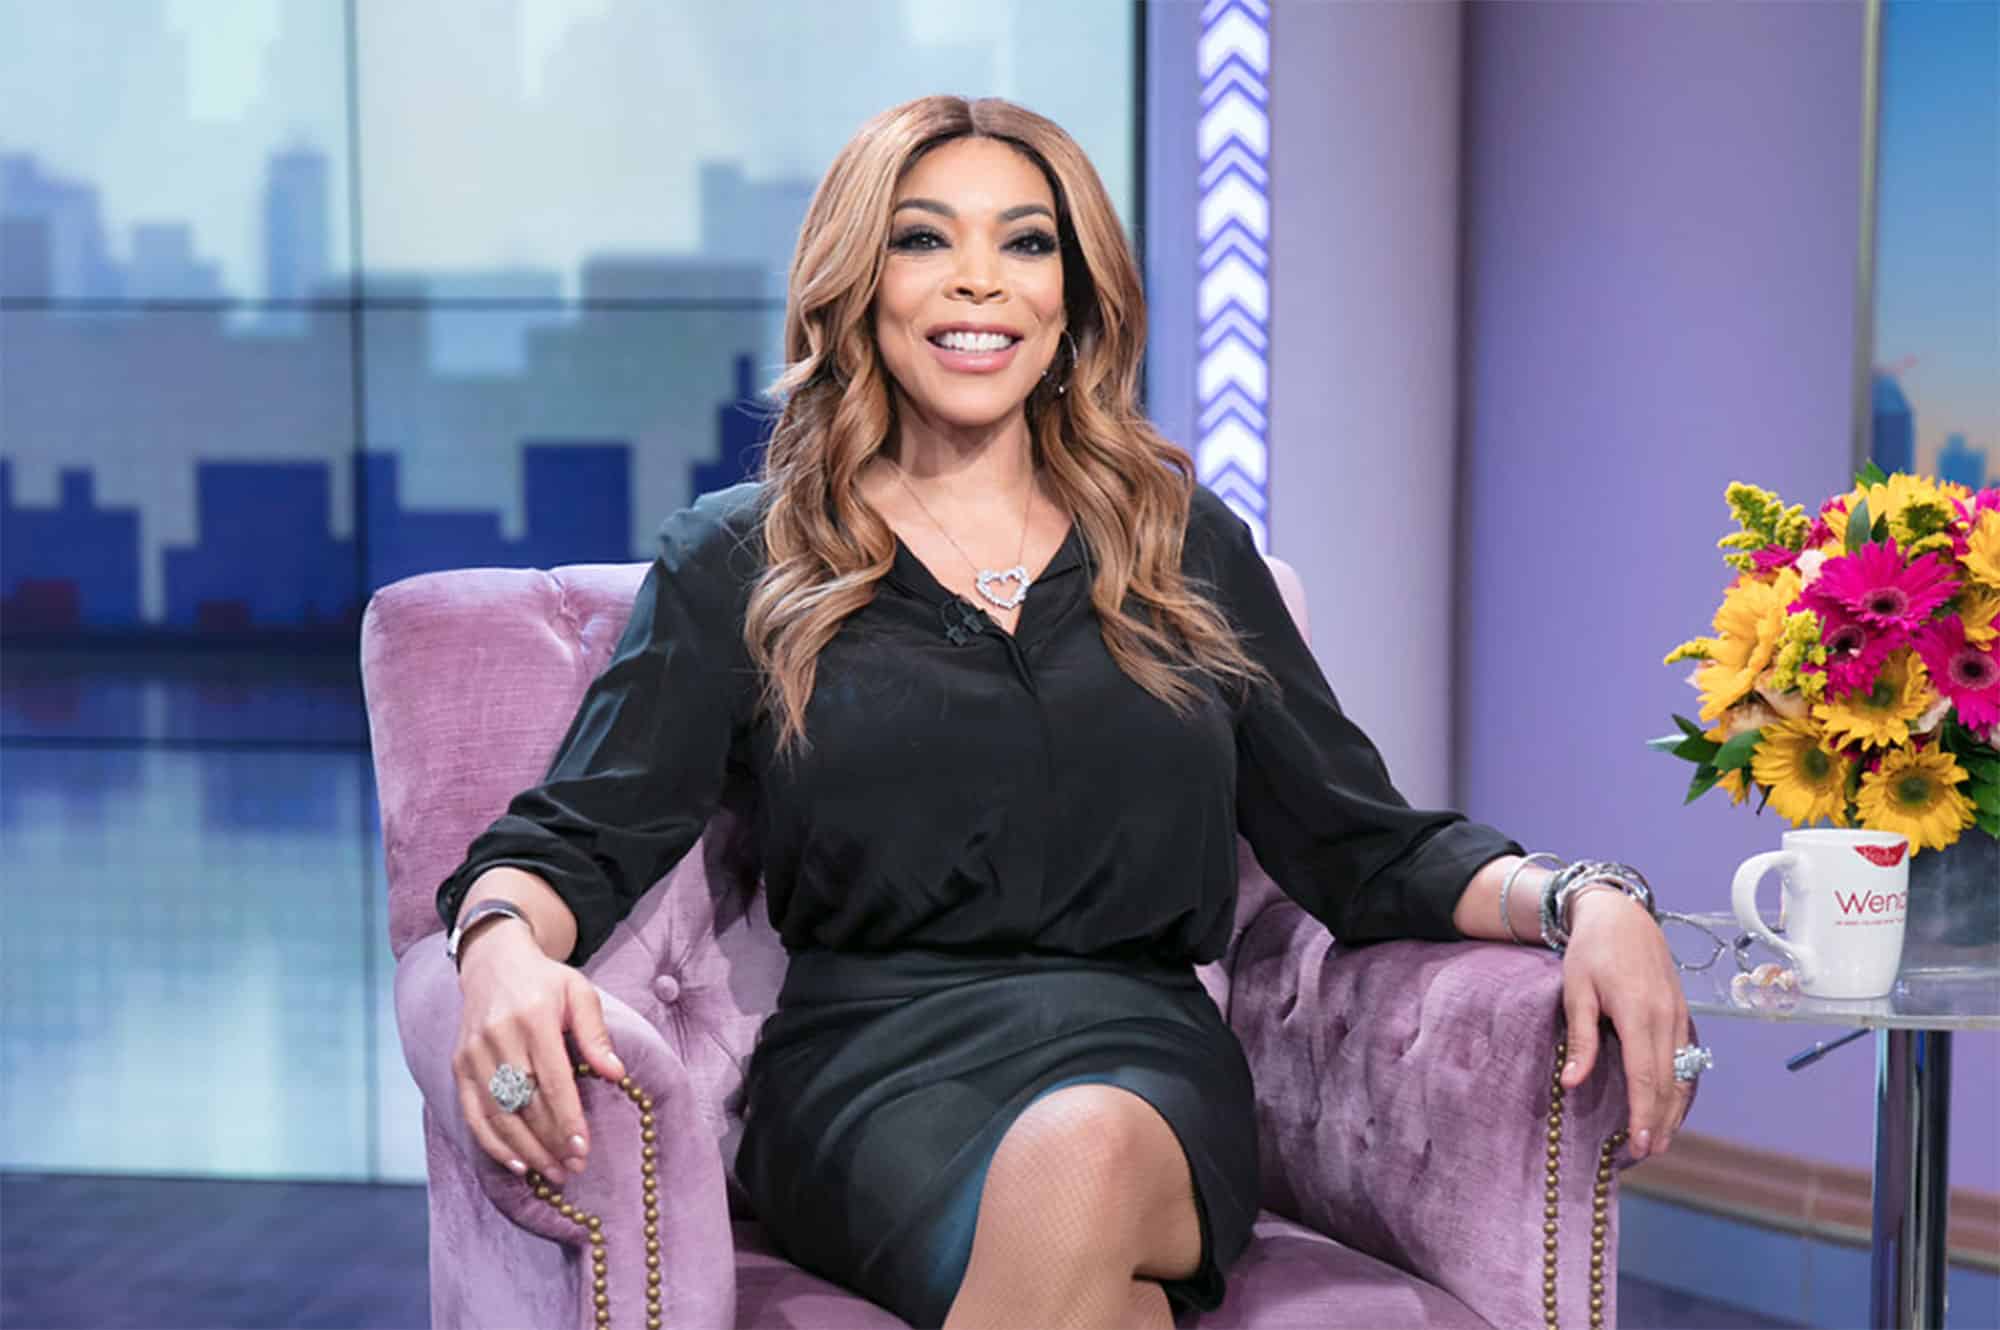 Wendy Williams to take health-related break from TV show